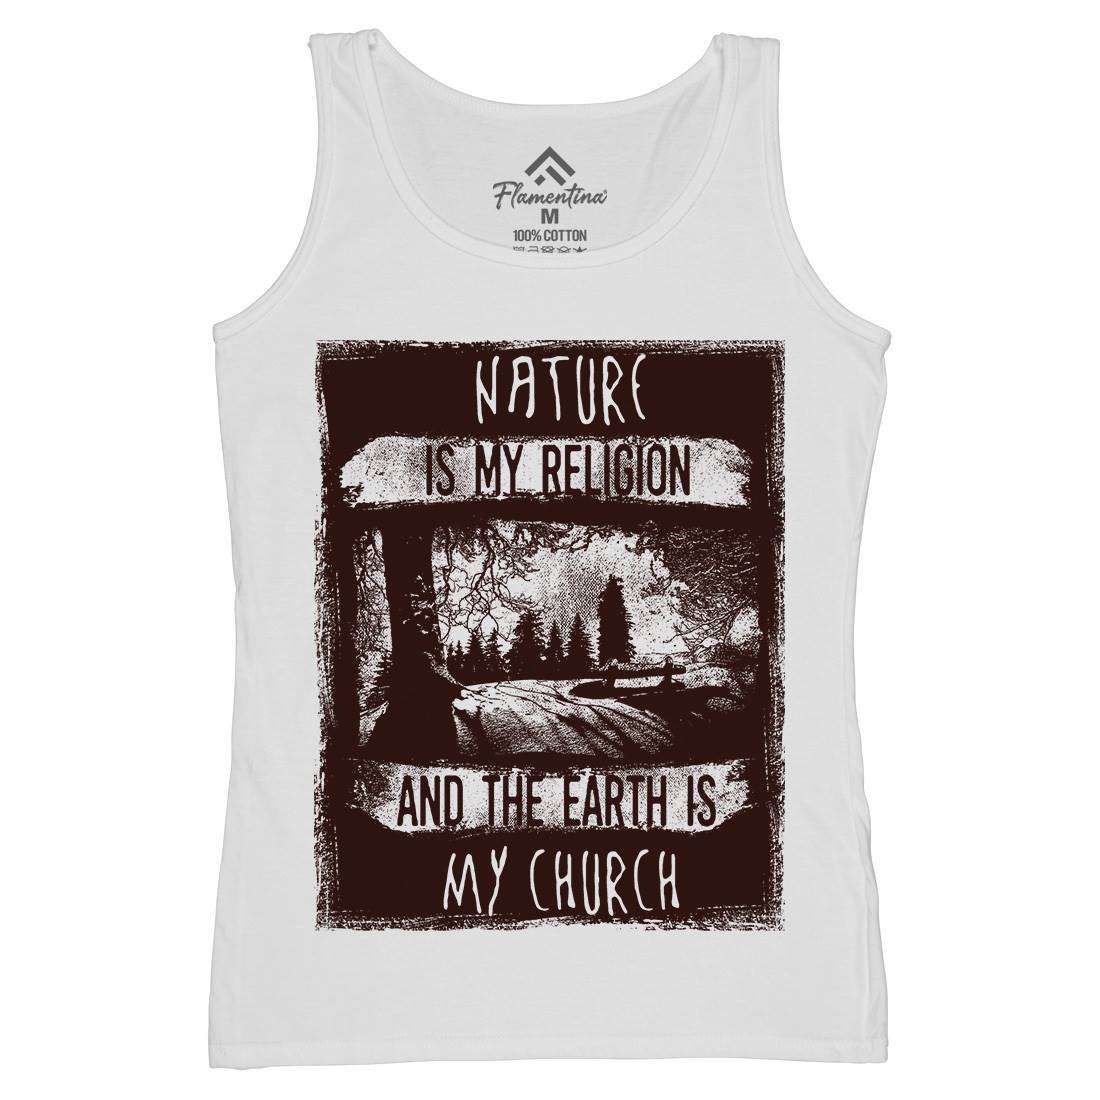 Is My Religion Womens Organic Tank Top Vest Nature C967